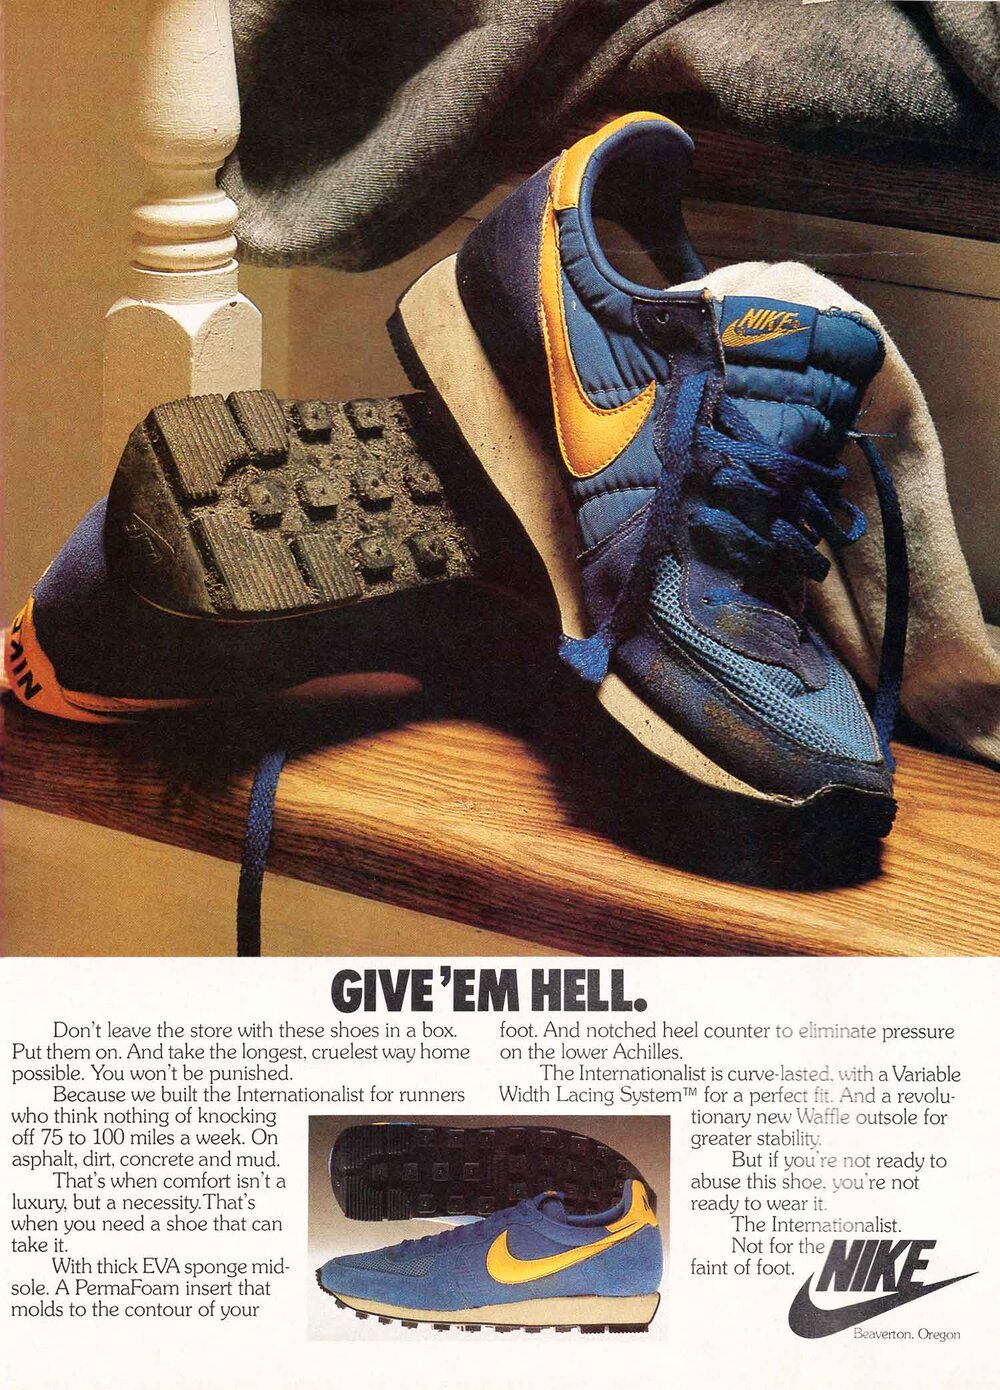 Warship Craft All Nike 1980s — The Deffest®. A vintage and retro sneaker blog. — Vintage Ads